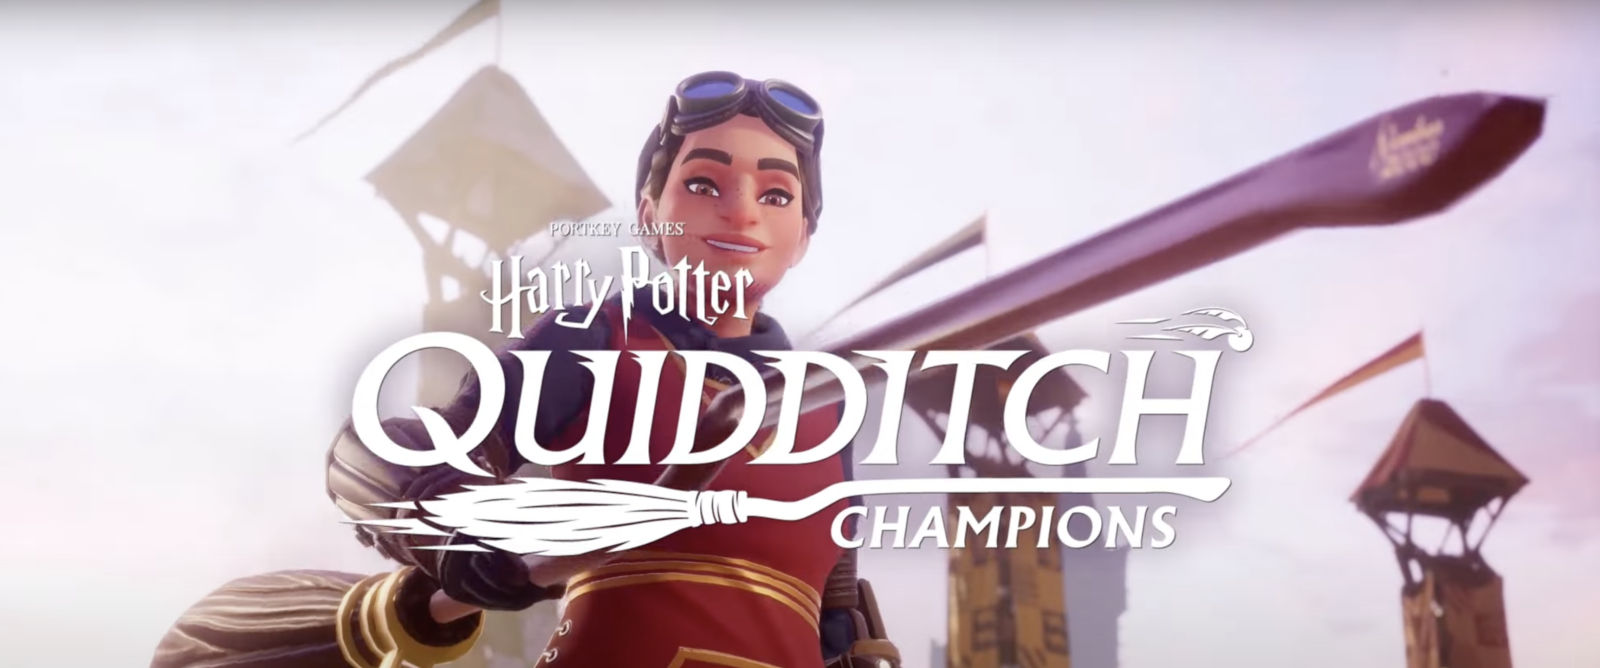 Harry Potter Quidditch Champions brings the wizarding sport to gamers